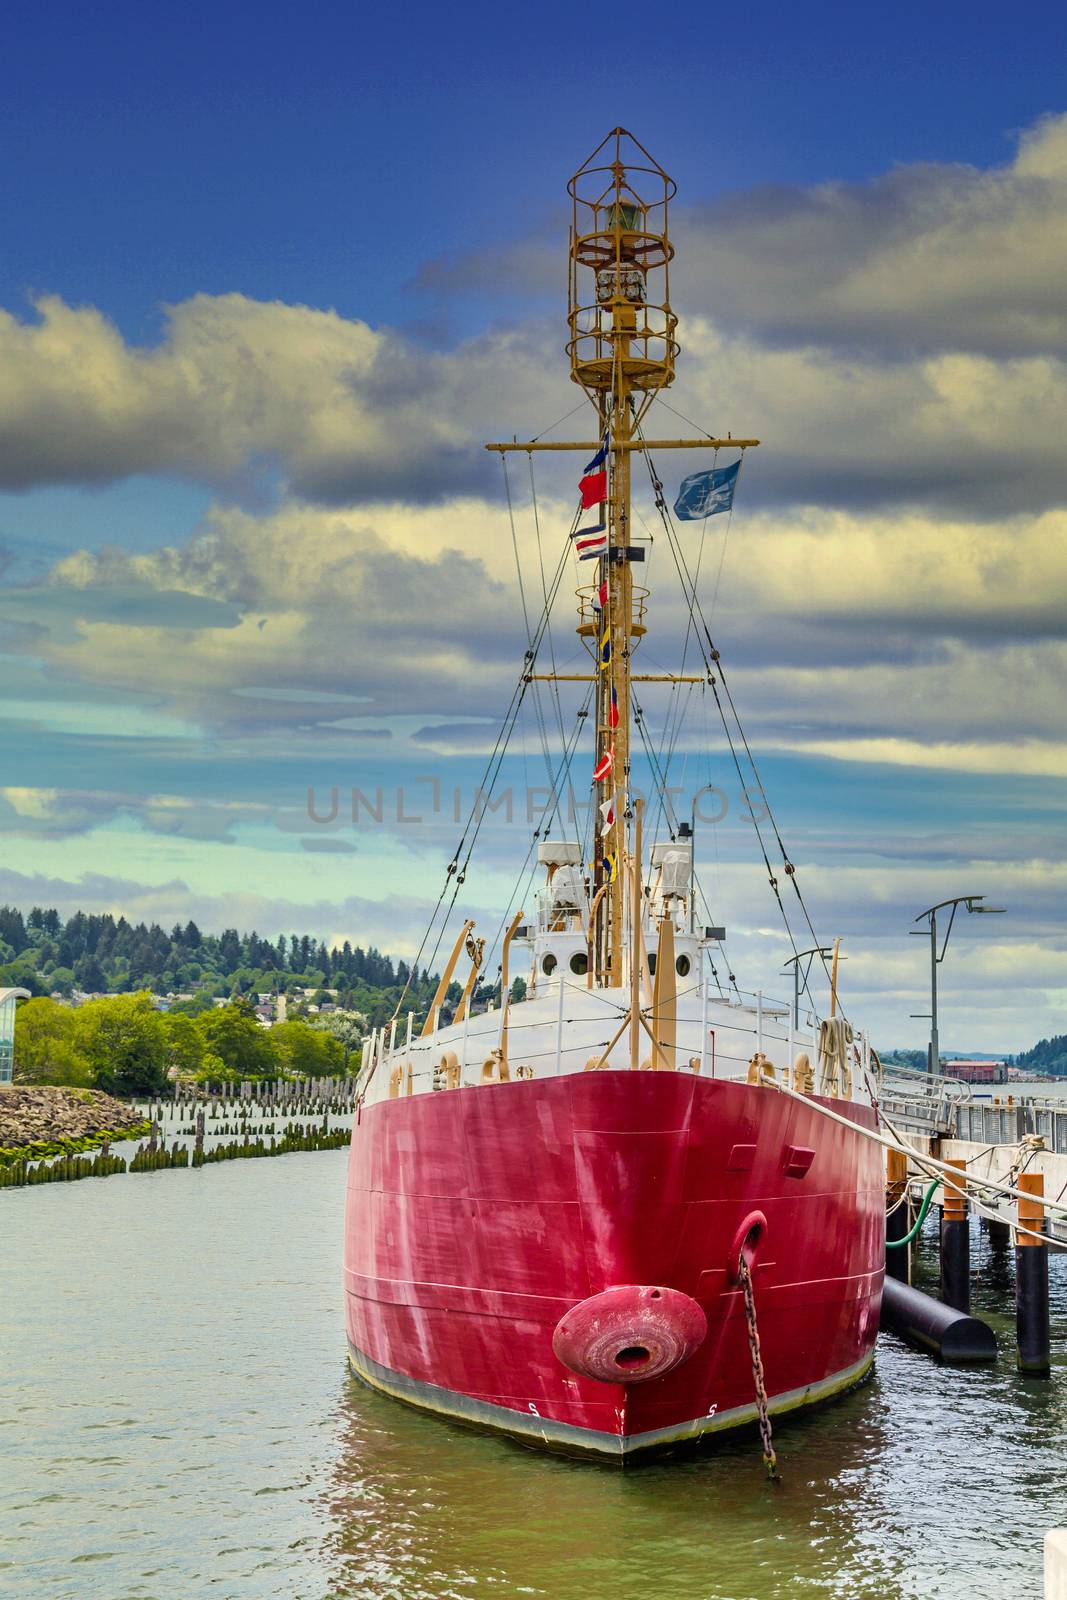 Red Ship in Oregon Port by dbvirago